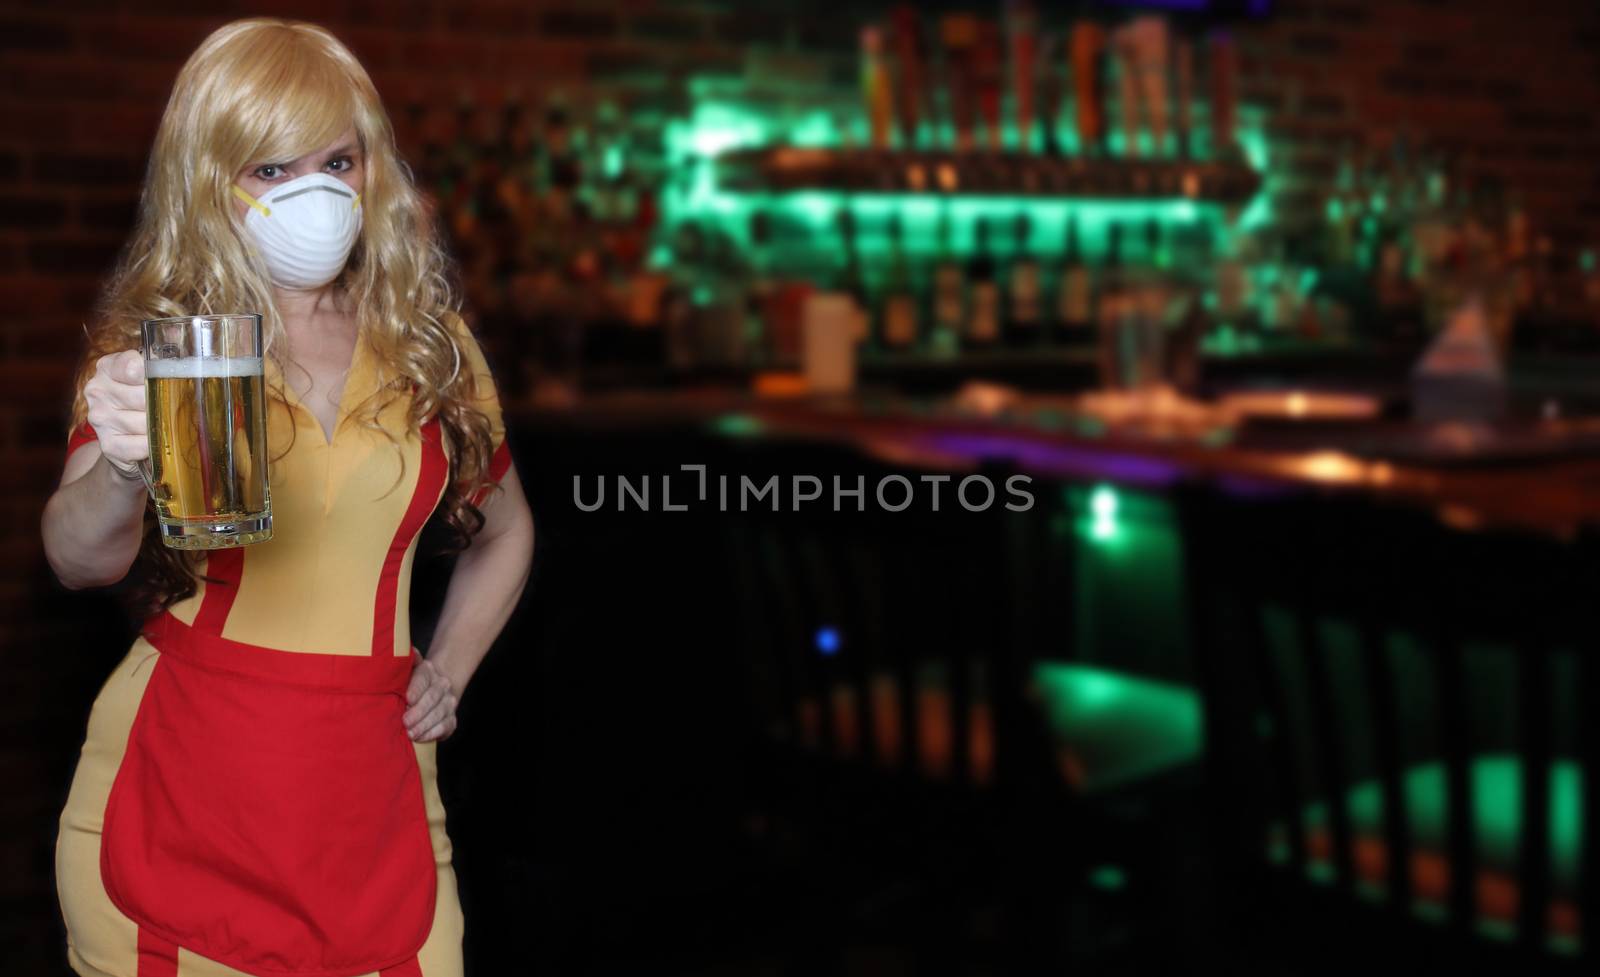 Waitress With N95 Mask To Prevent Illness by Marti157900